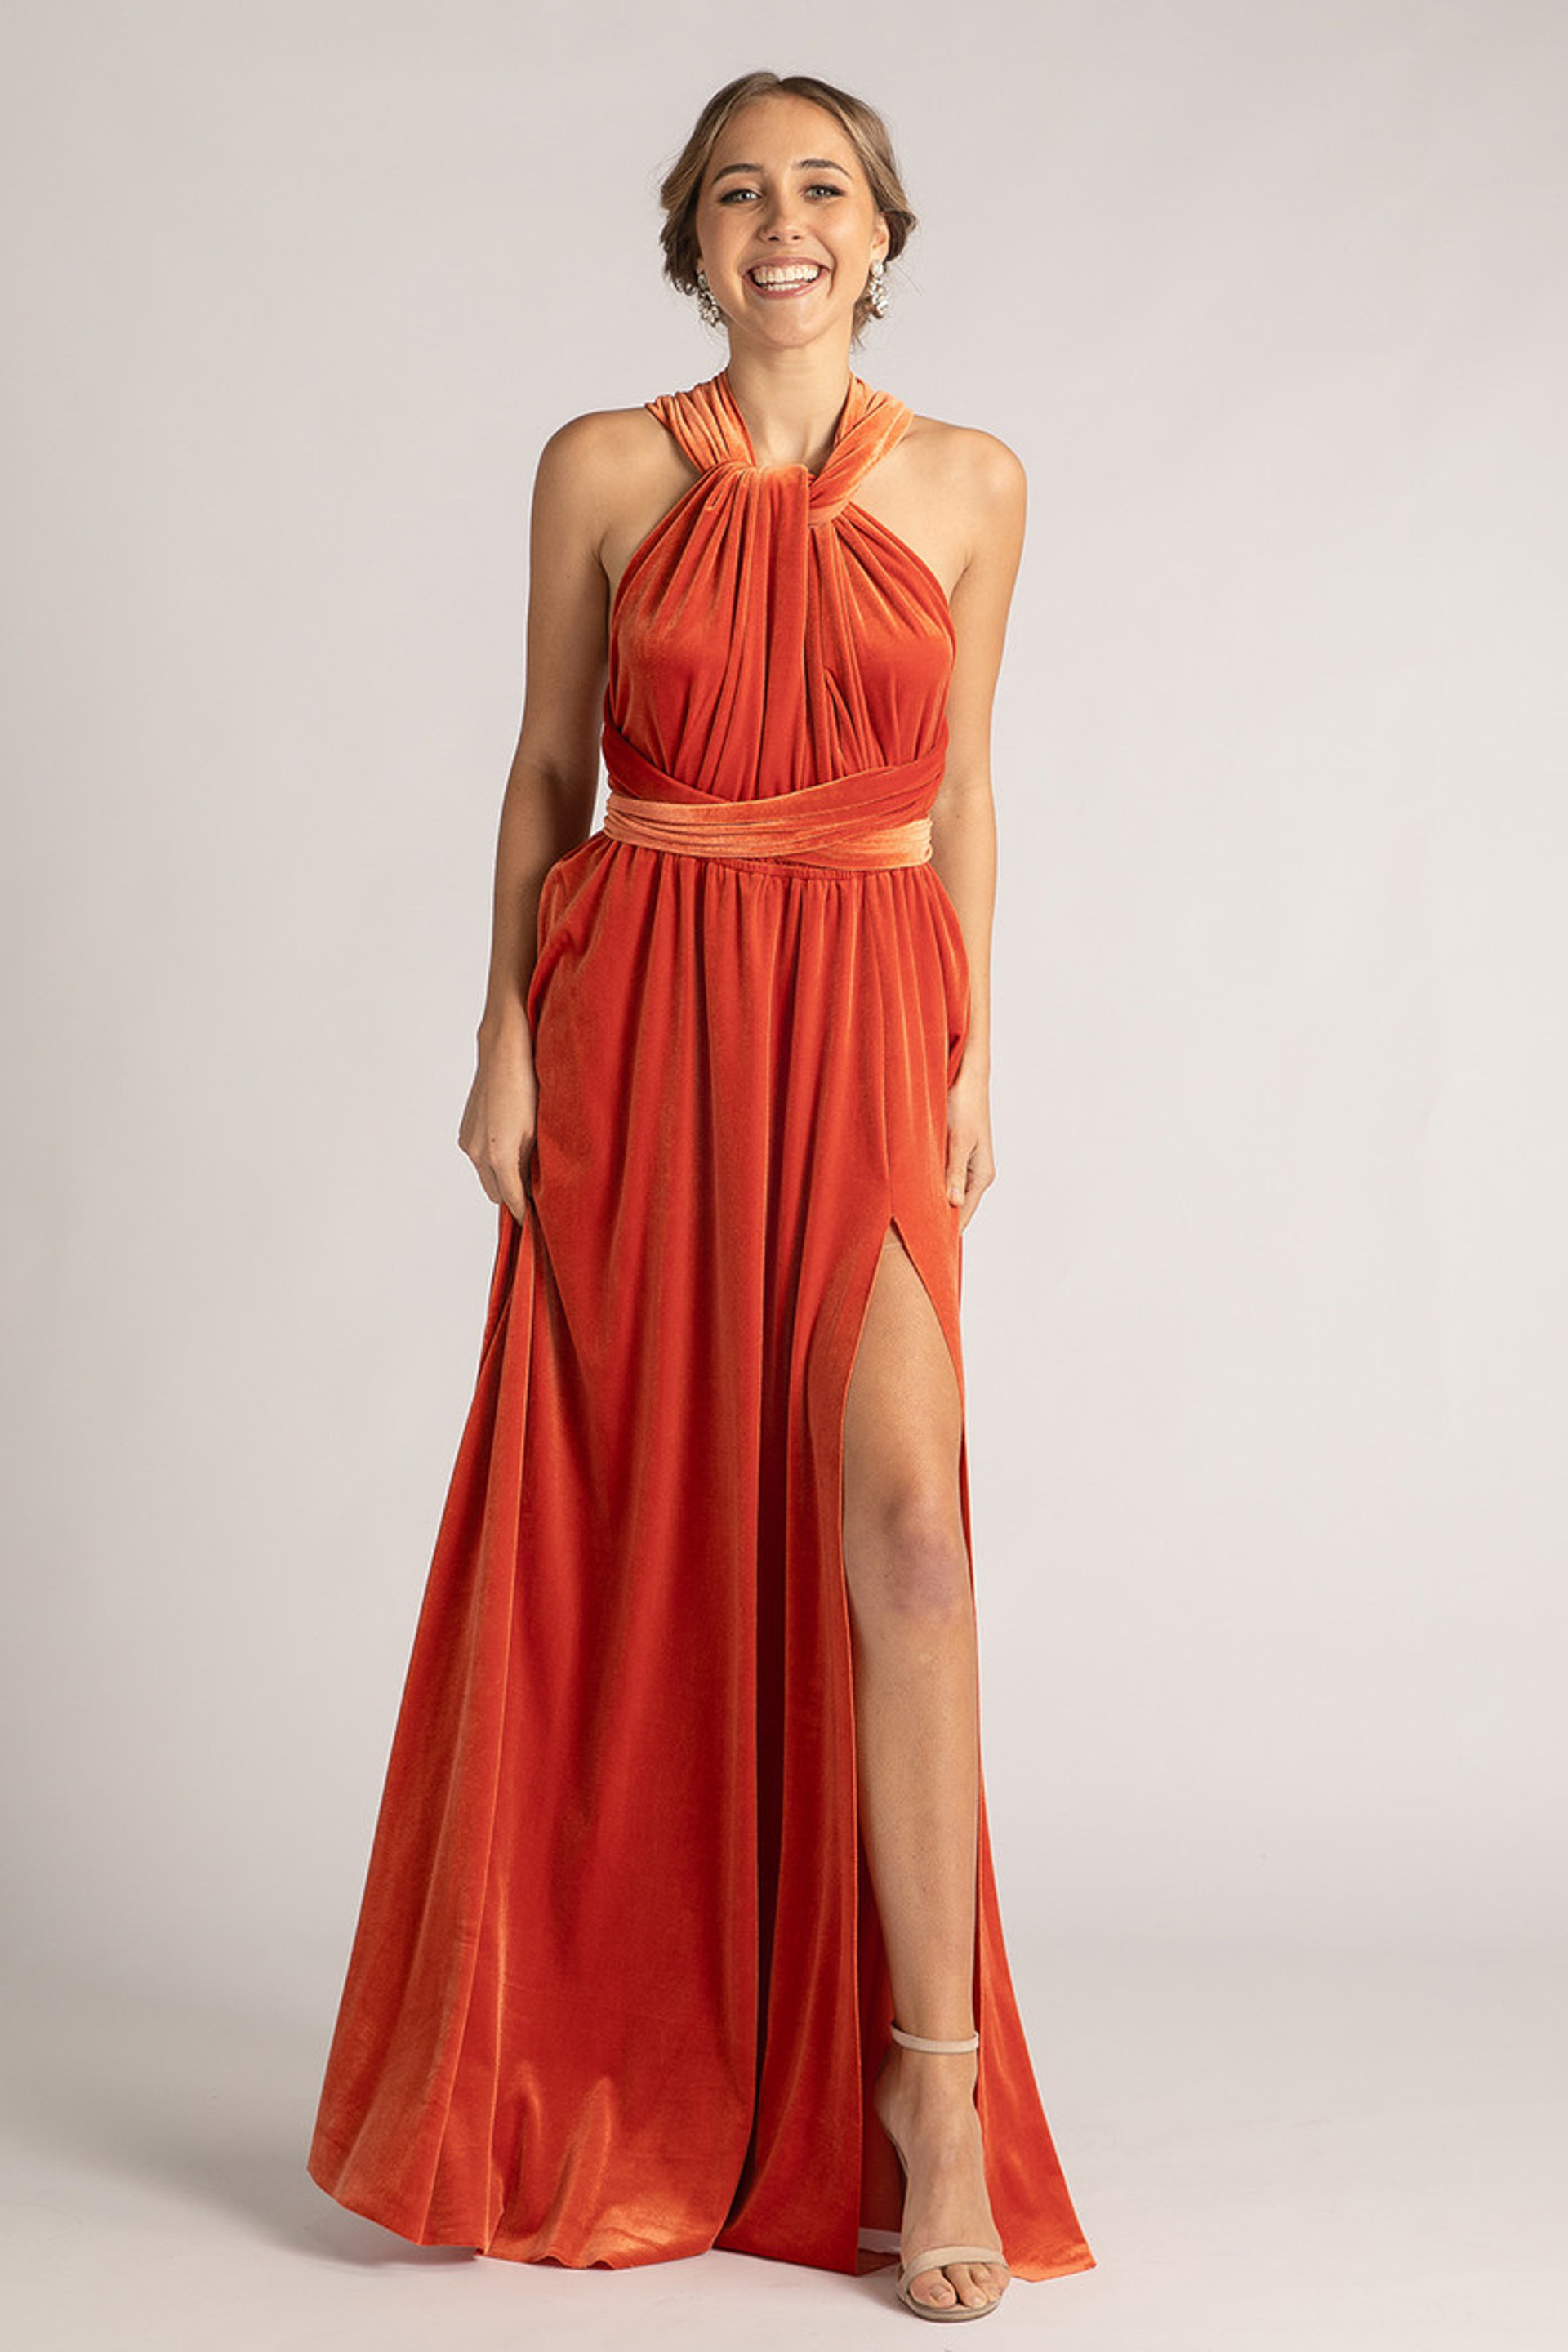 Velvet Multiway Infinity Dress in Coral For Sale - Bridesmaids Dresses ...